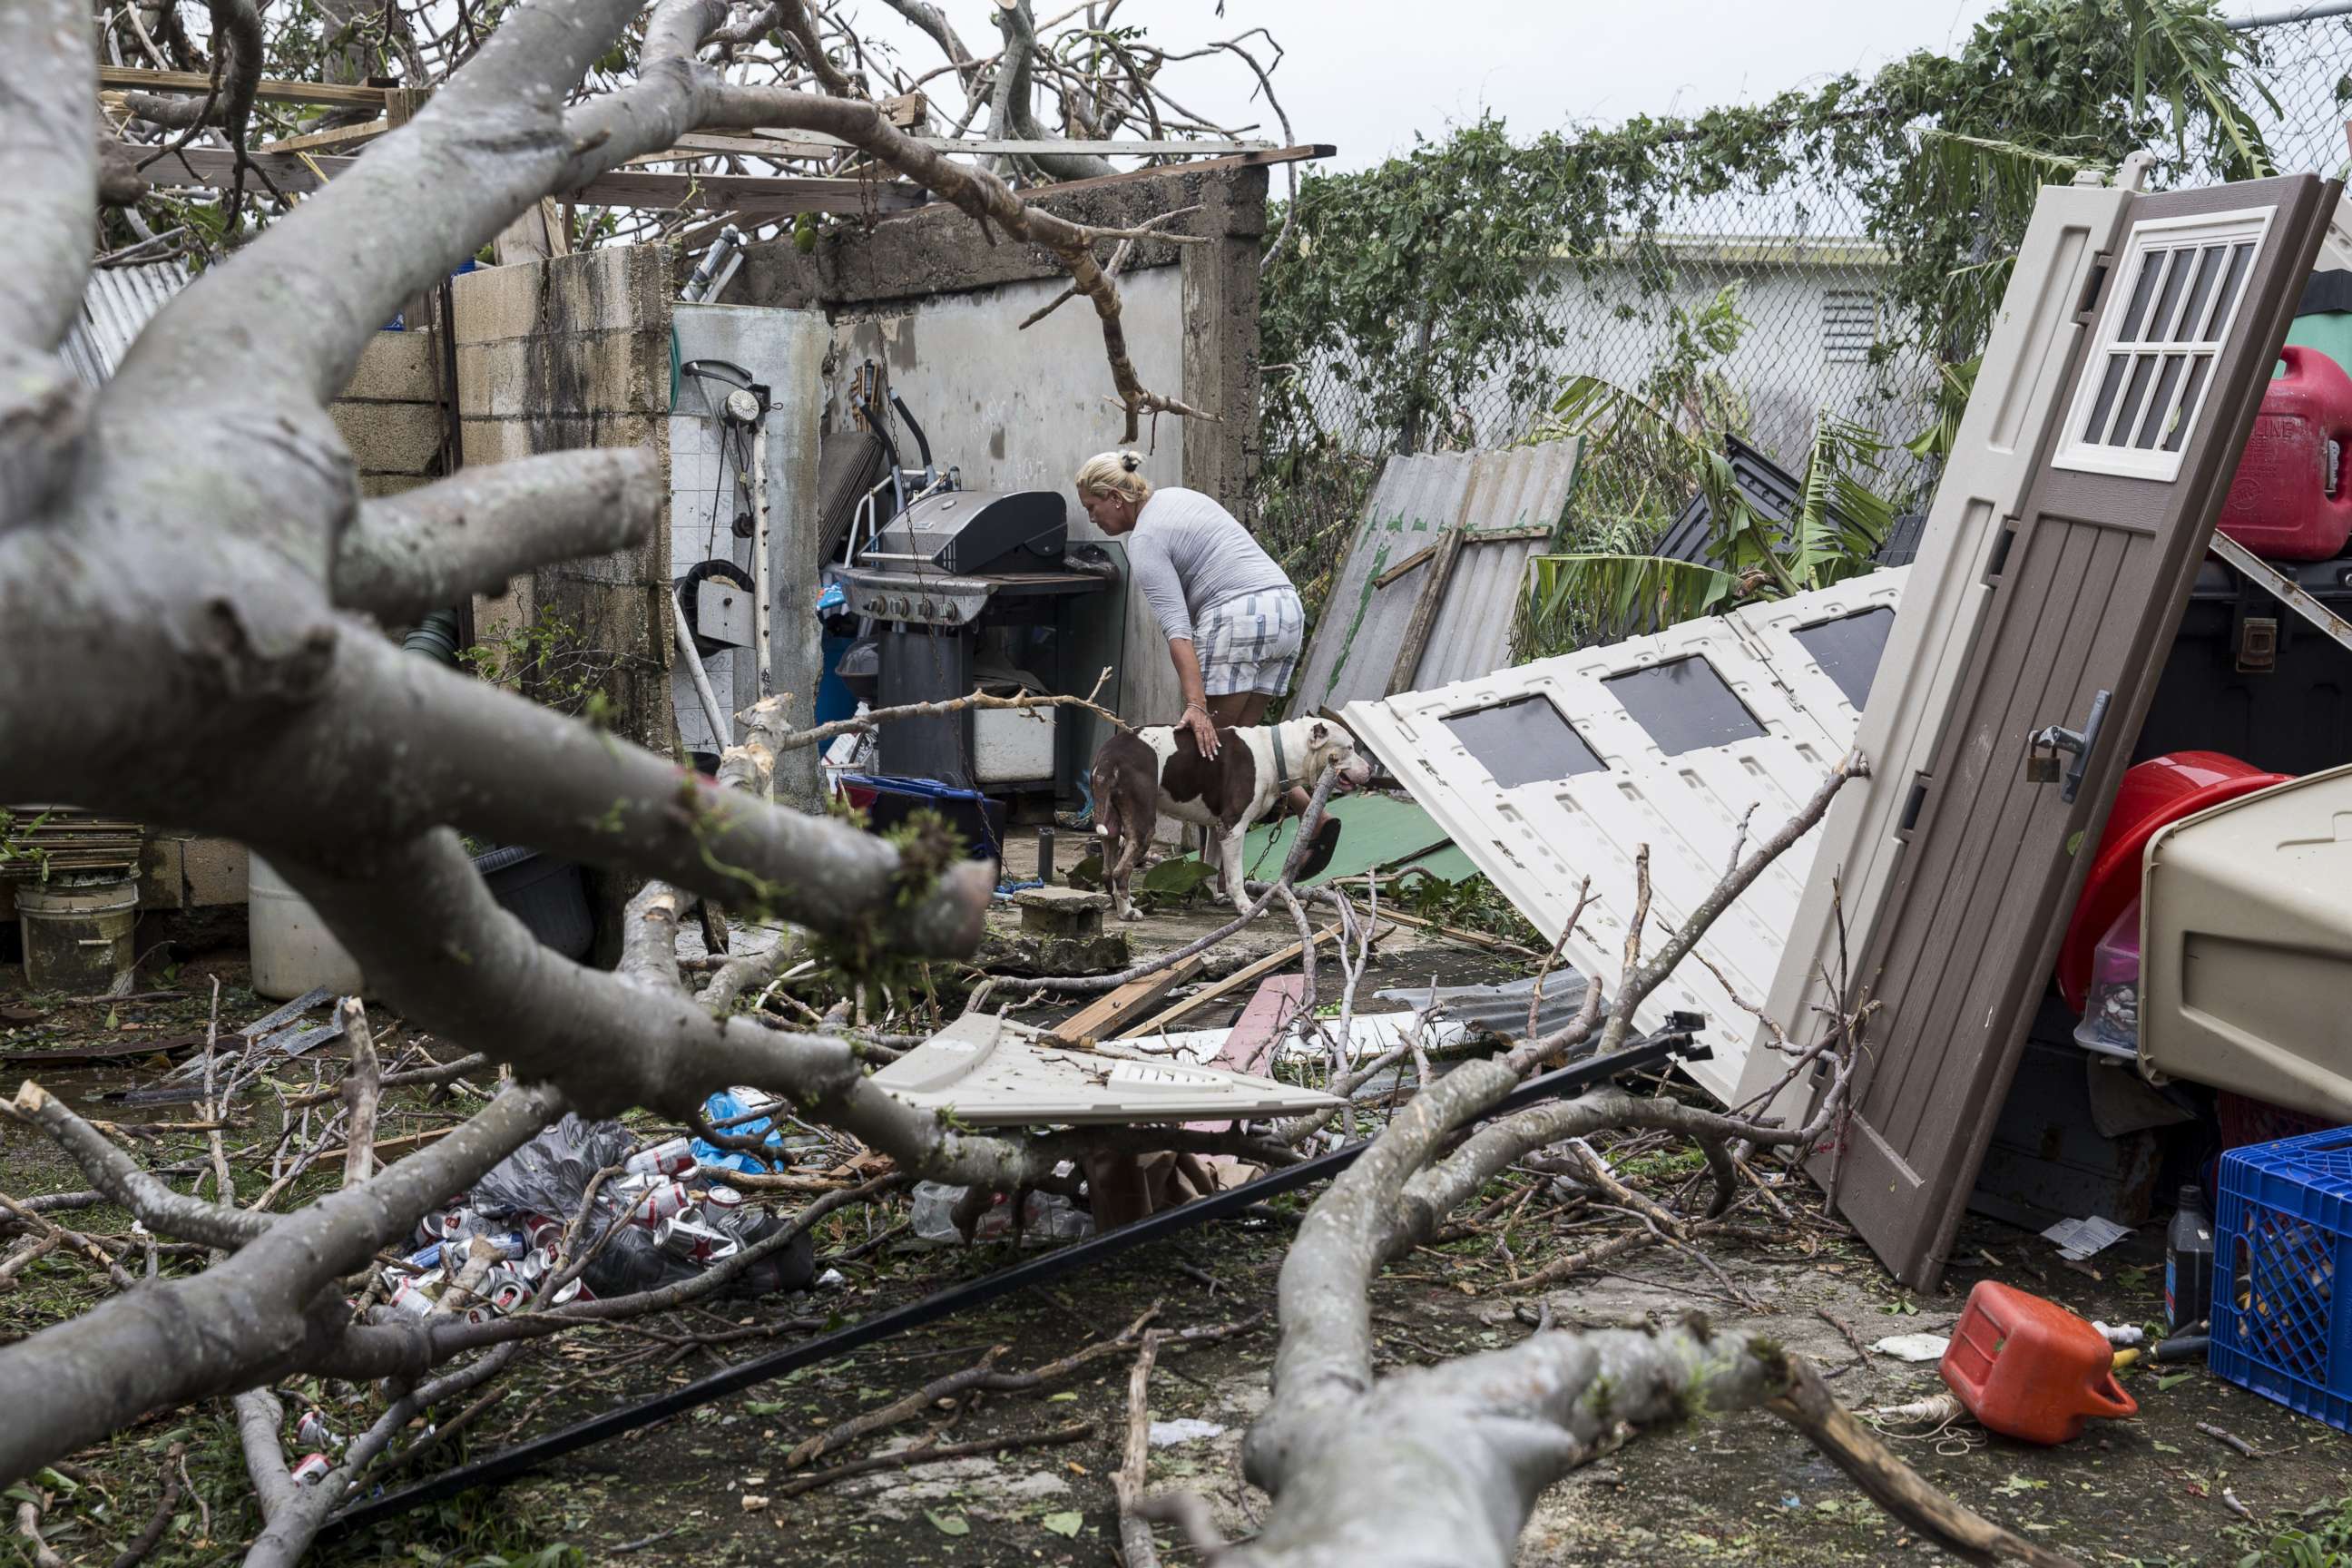 PHOTO: A resident surveys the damage to her property after Hurricane Maria made landfall, Sept. 21, 2017, in the Guaynabo suburb of San Juan, Puerto Rico.